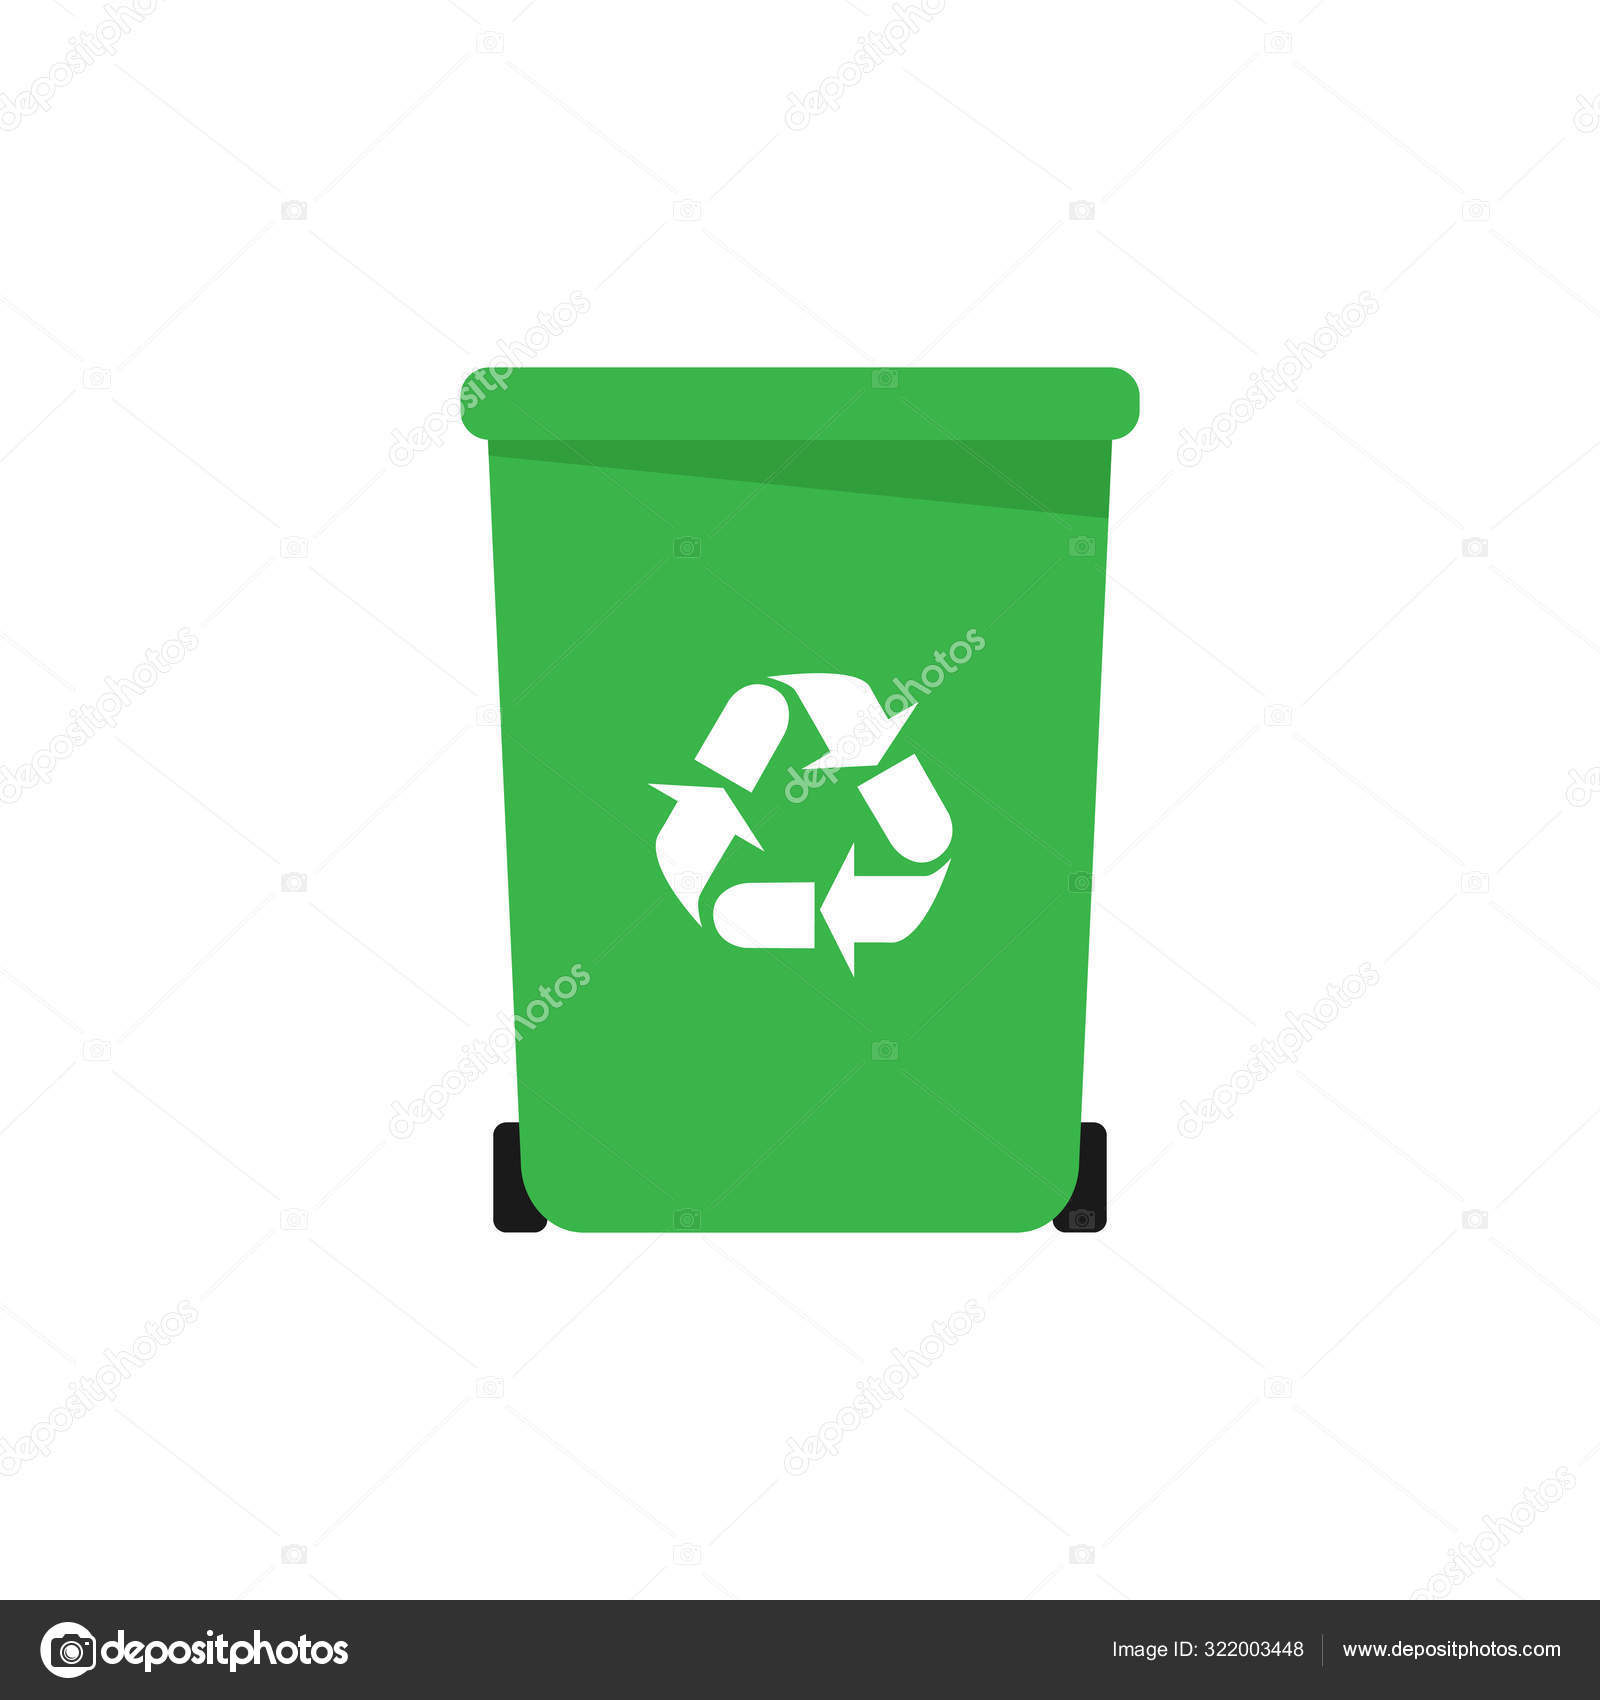 Garbage Bin Or Trash Can Waste And Rubbish Recycling Symbol Vector Illustration Eps 10 Vector Image By C Hardqor4ik Vector Stock